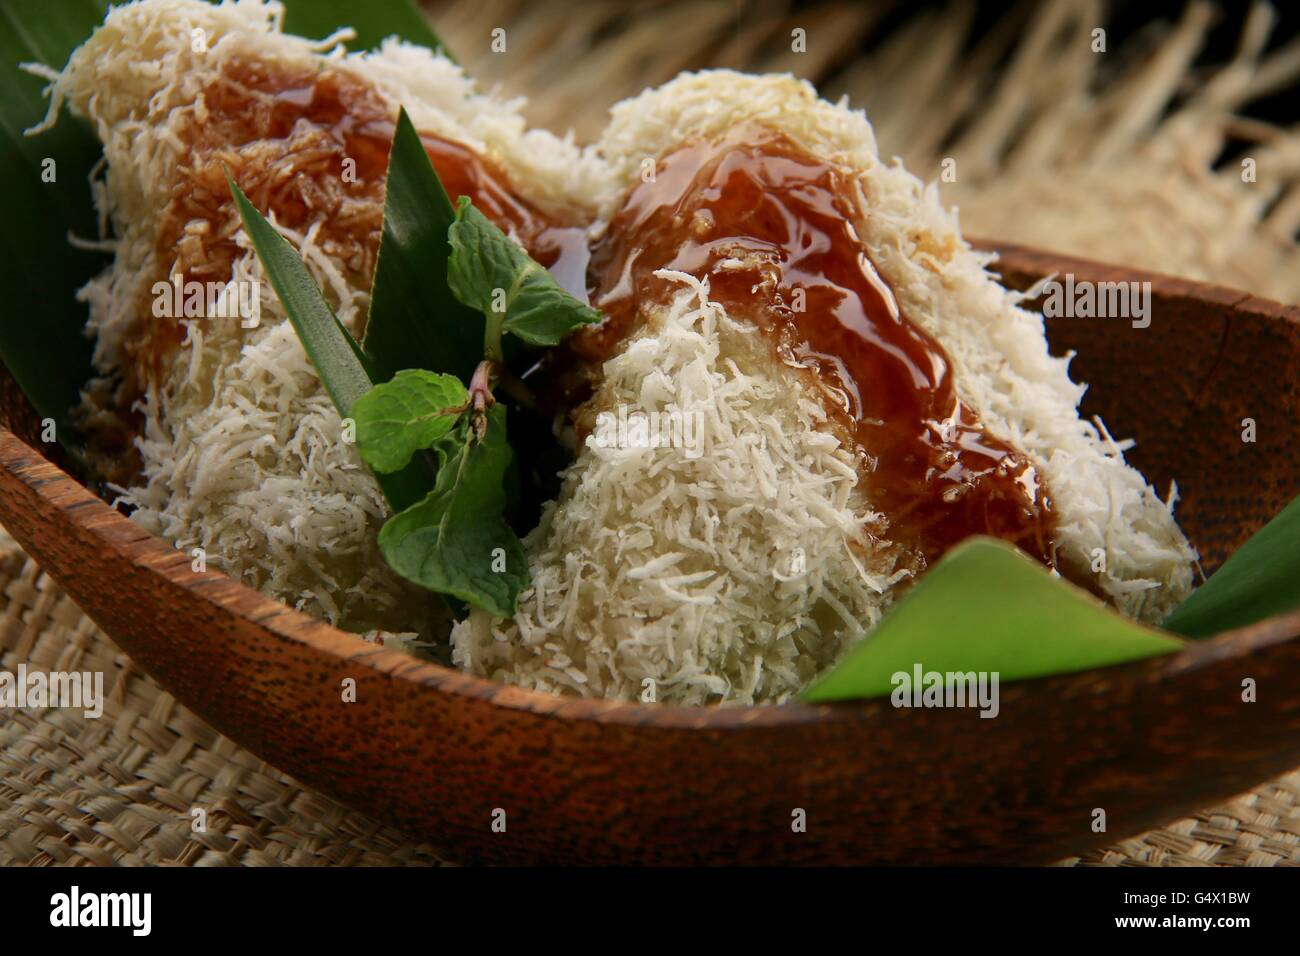 Lupis, traditional Javanese glutinous rice cake with grated coconut and palm sugar syrup. Plated in contemporary Javanese set. Stock Photo